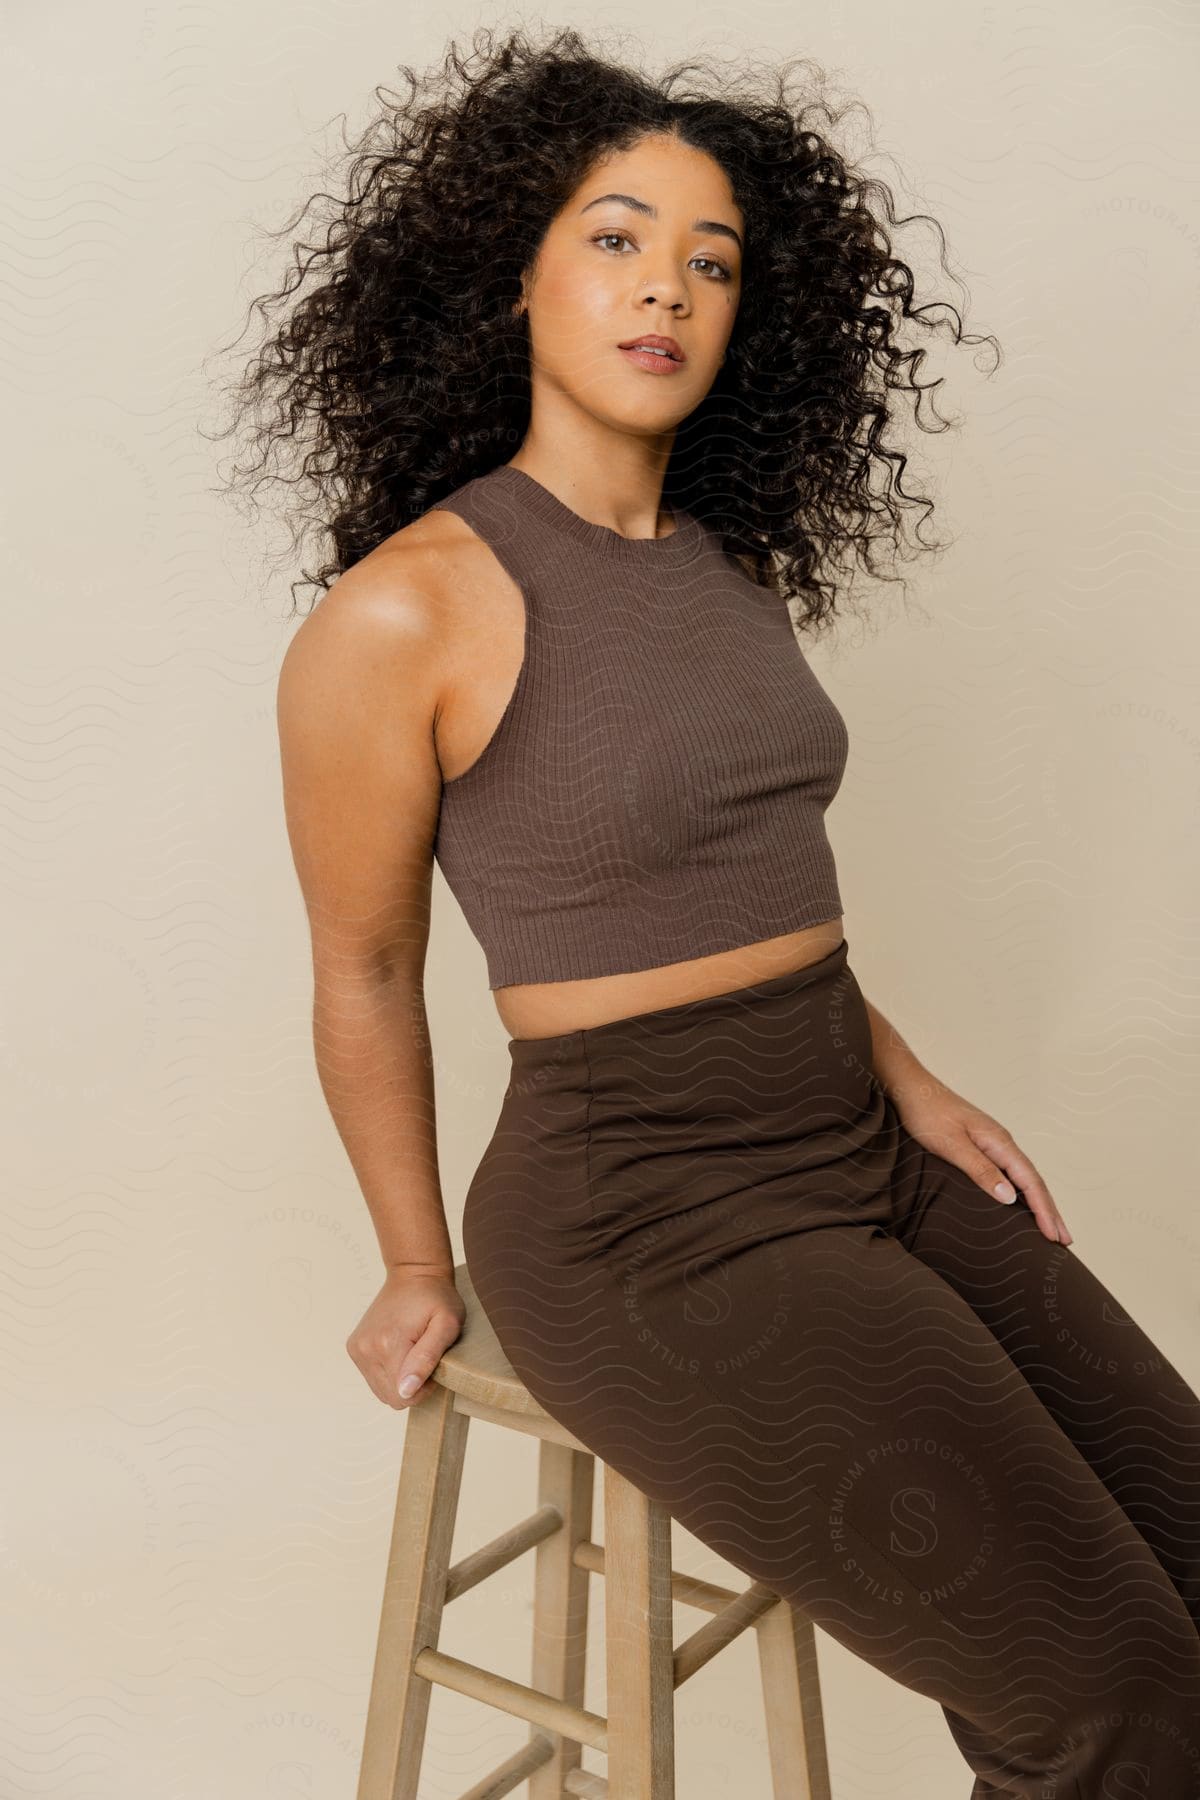 A young woman with dark, curly hair poses while sitting on a wooden bar stool.